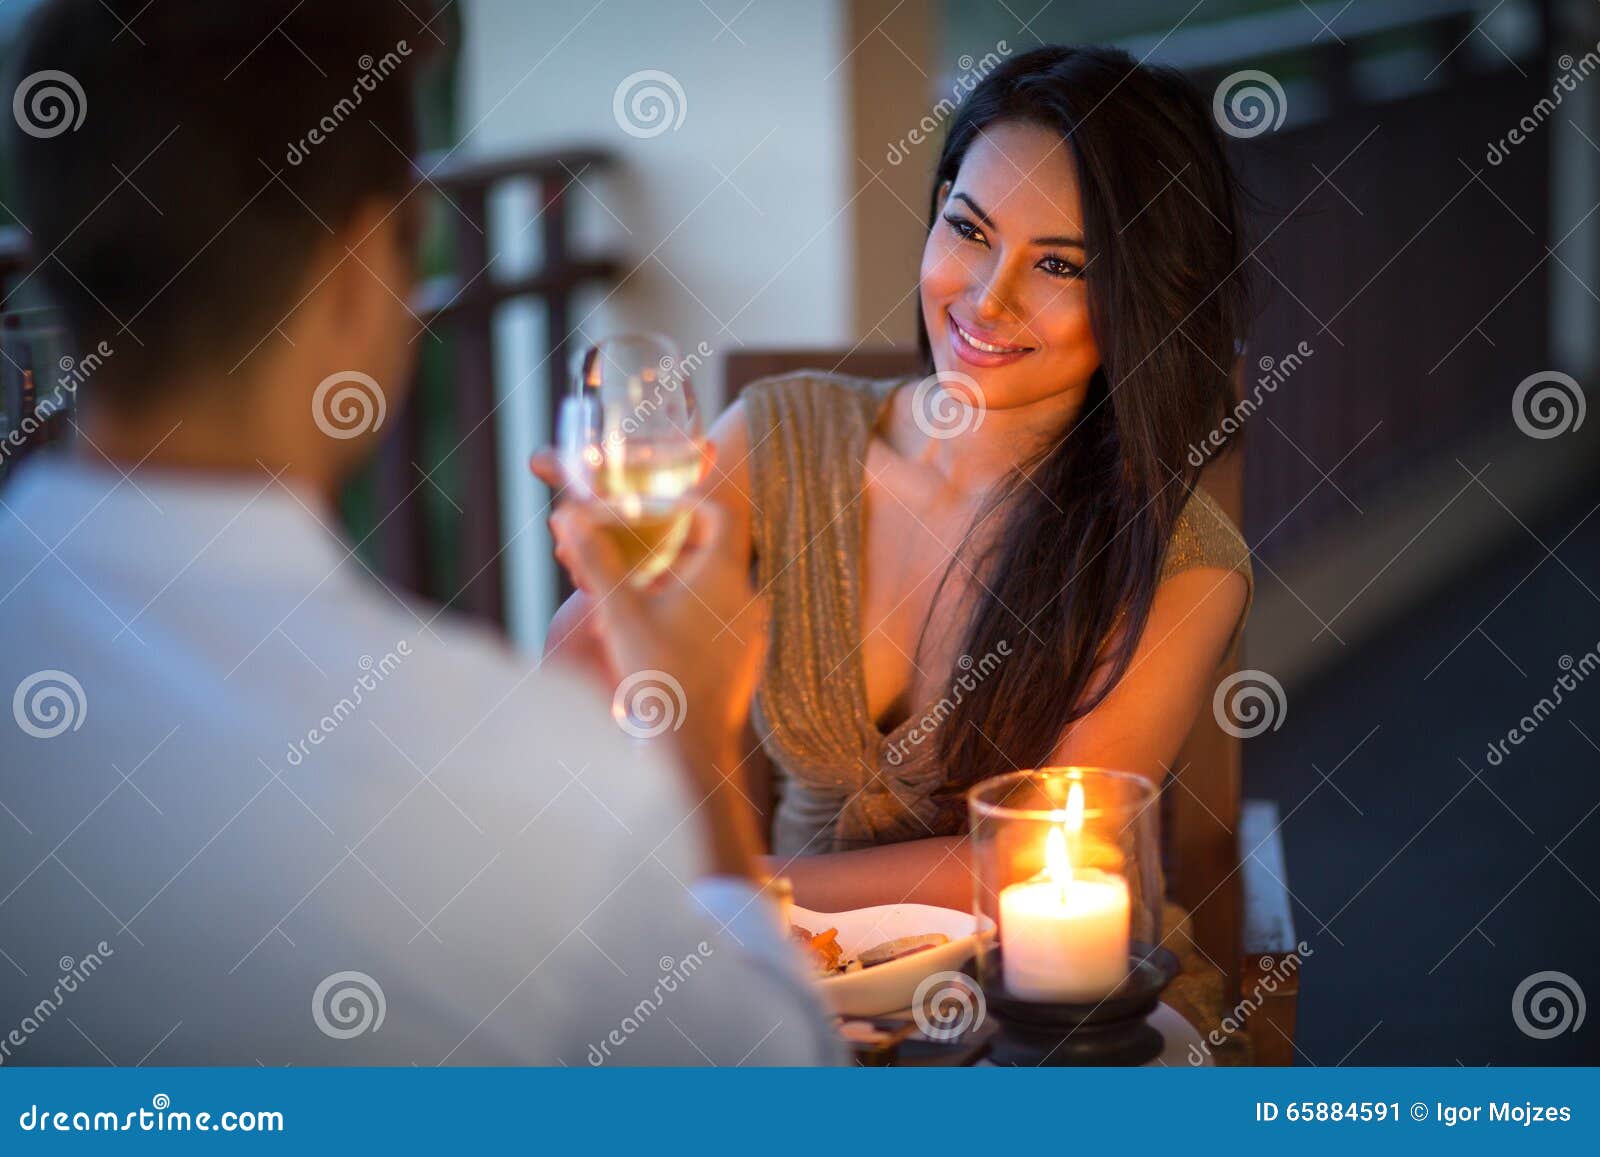 young couple with a romantic dinner with candles